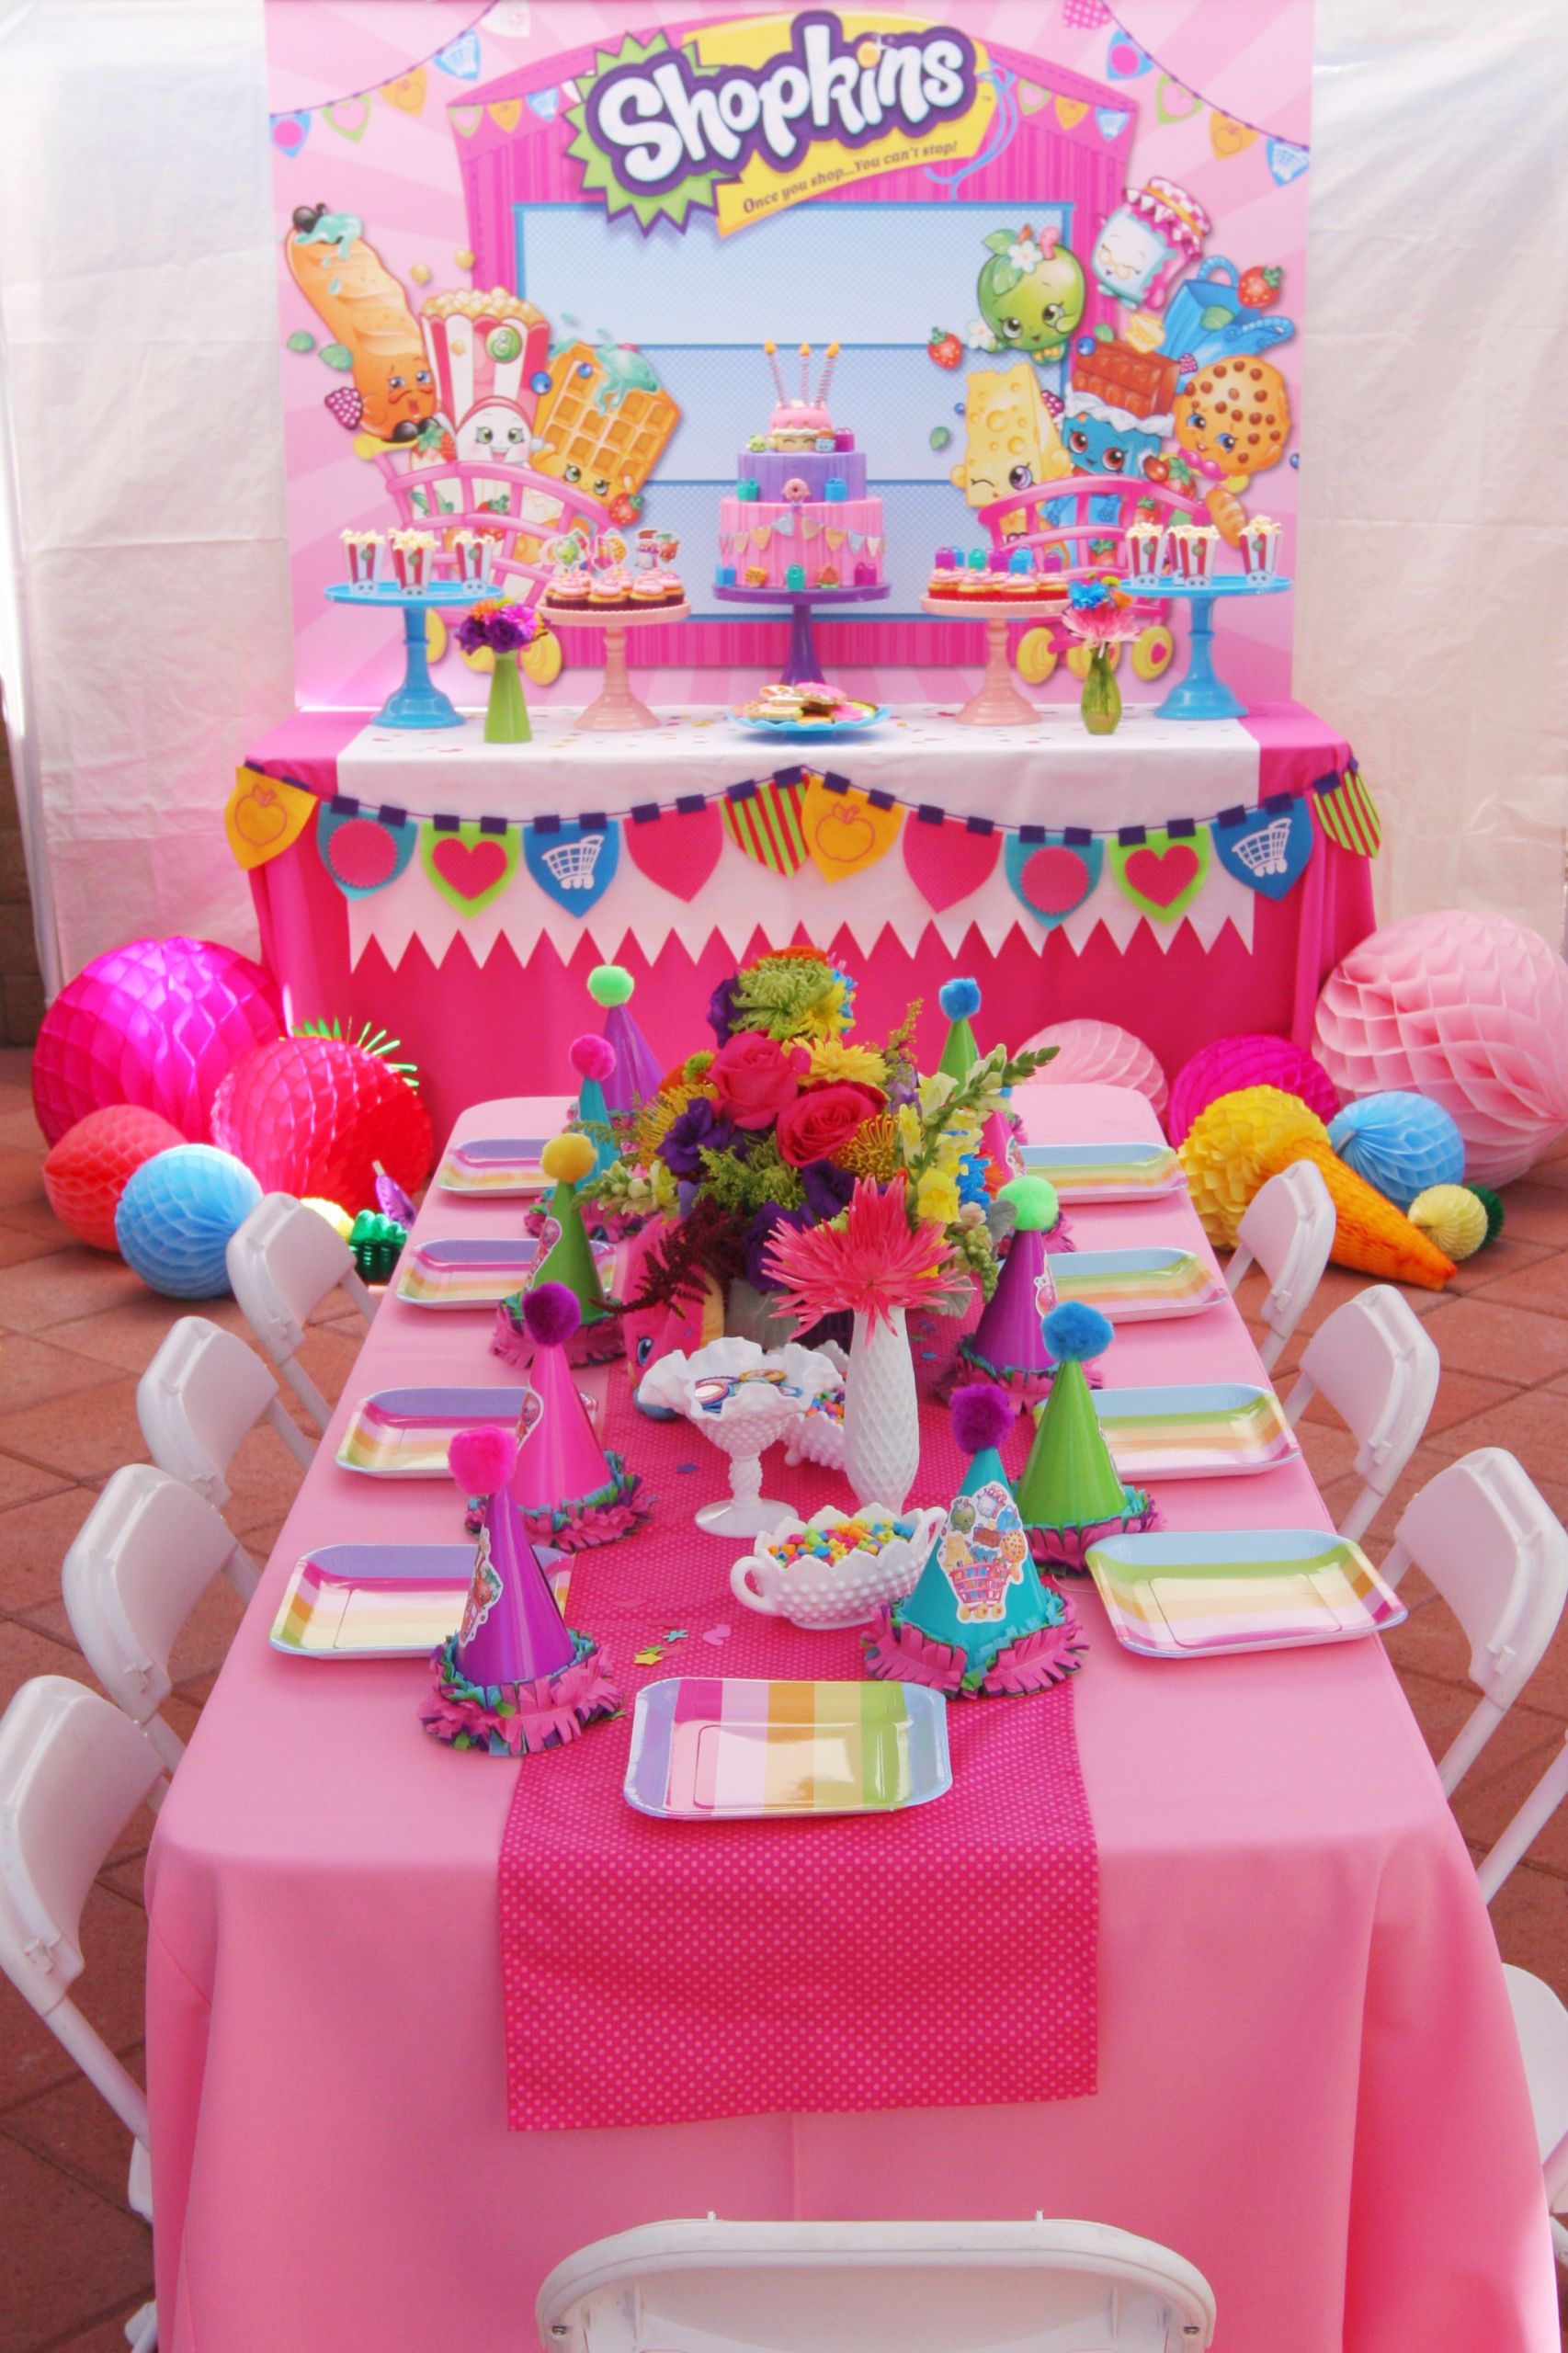 Shopkins Birthday Party Ideas
 Shopkins Birthday Party by Minted and Vintage